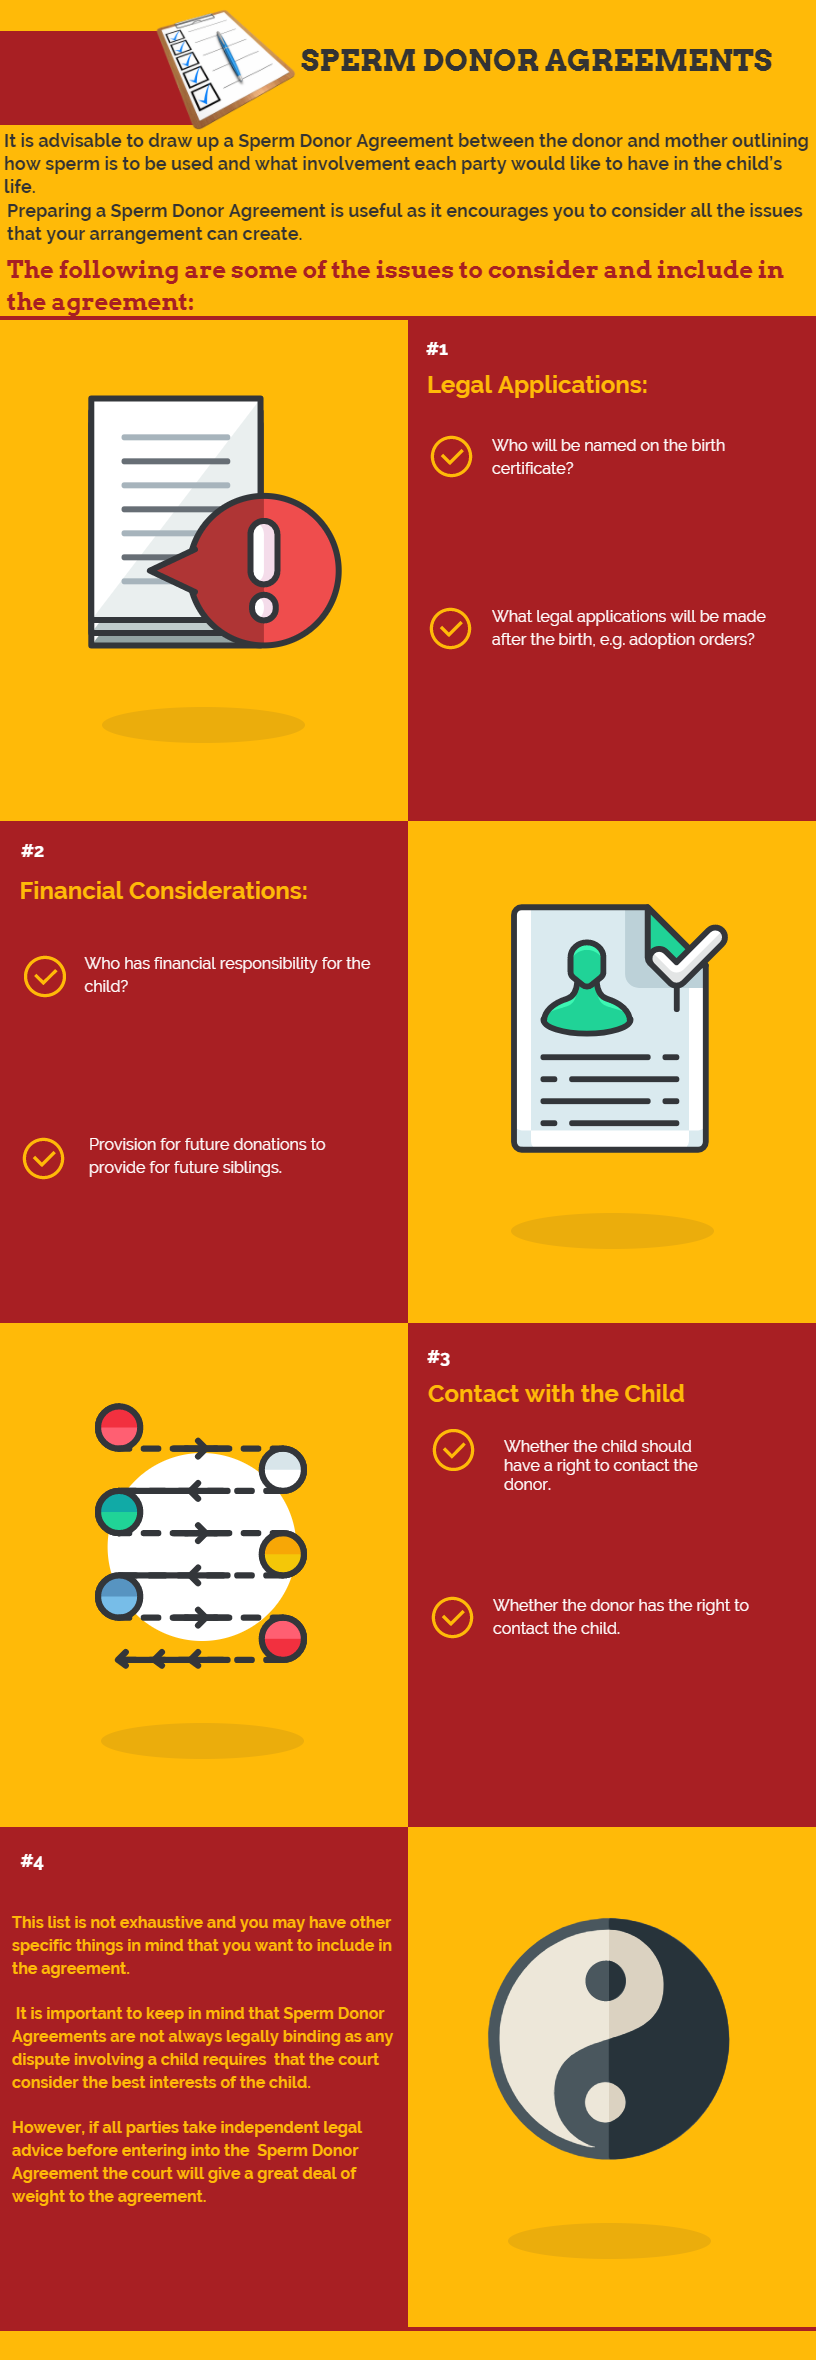 sperm donor agreements infographic